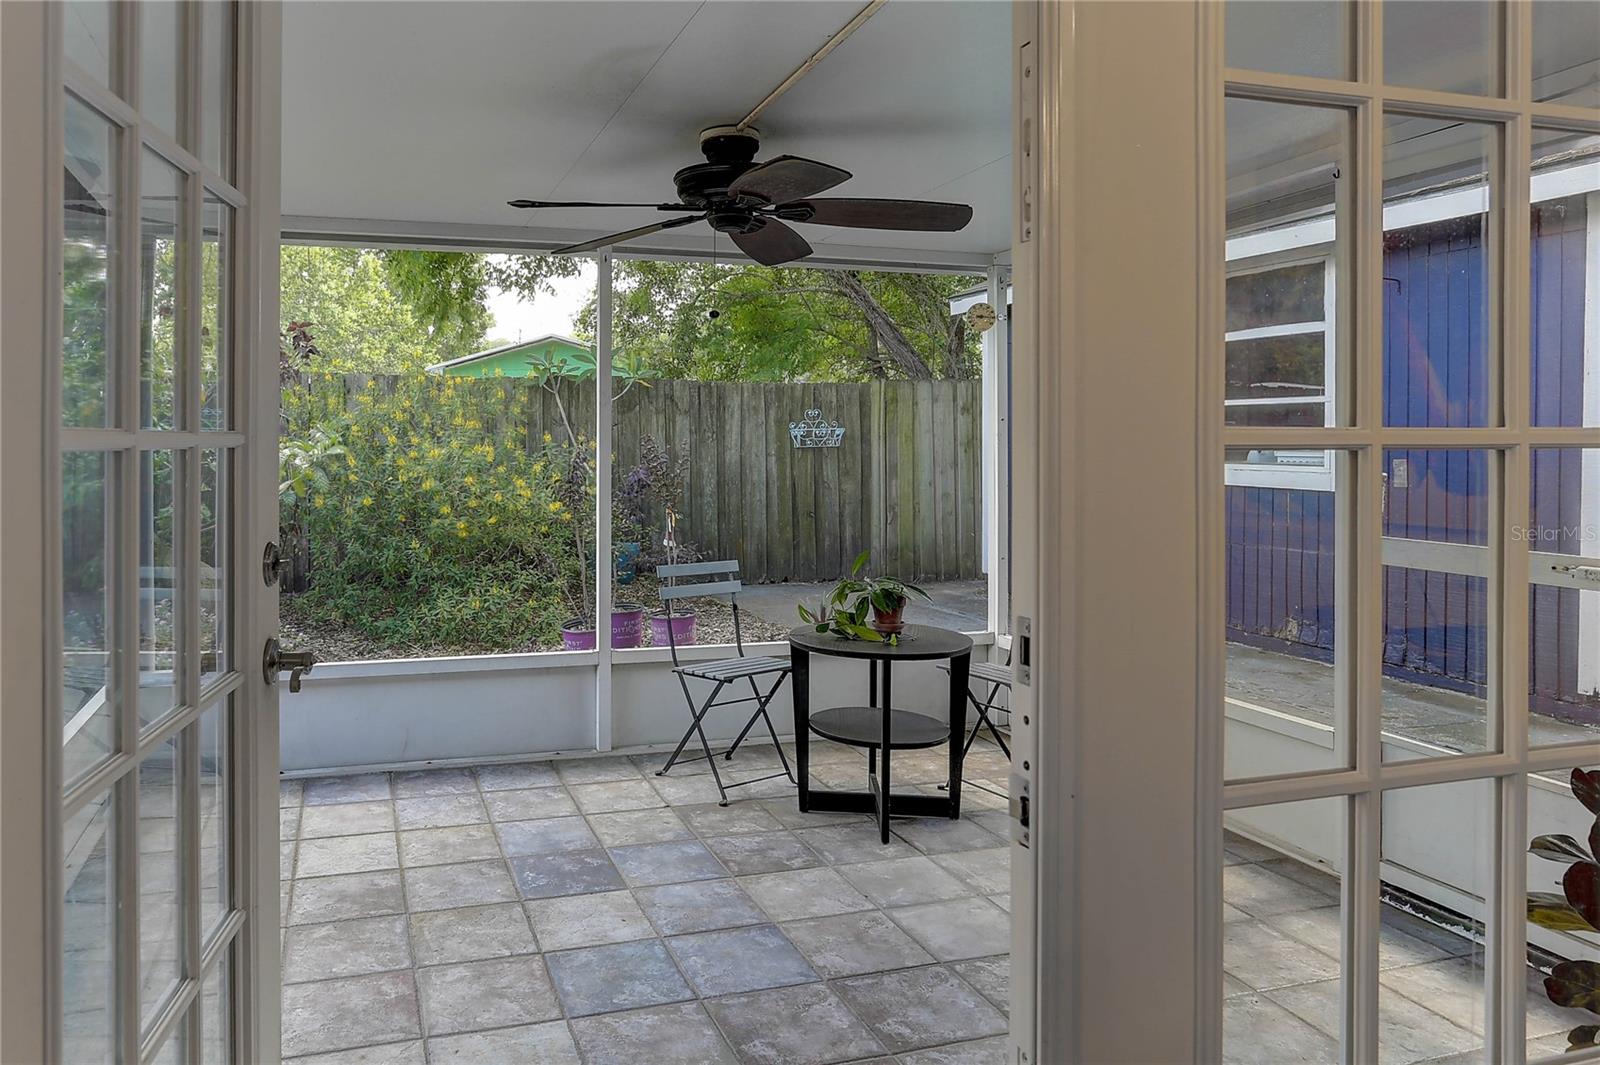 Nice sized screened porch with ceiling fan